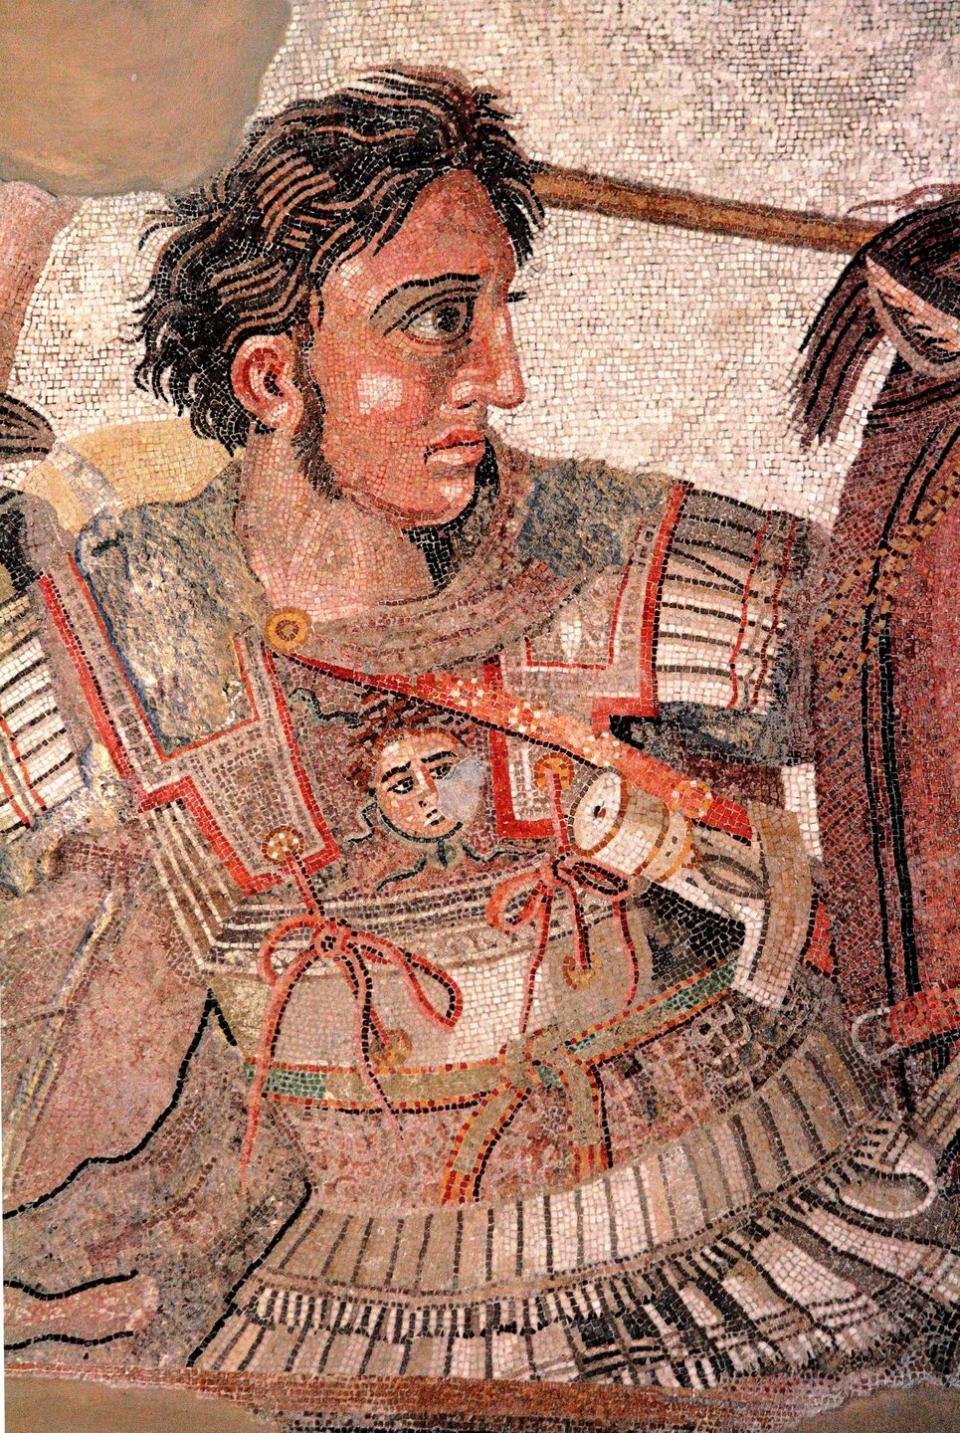 39) Alexander the Great